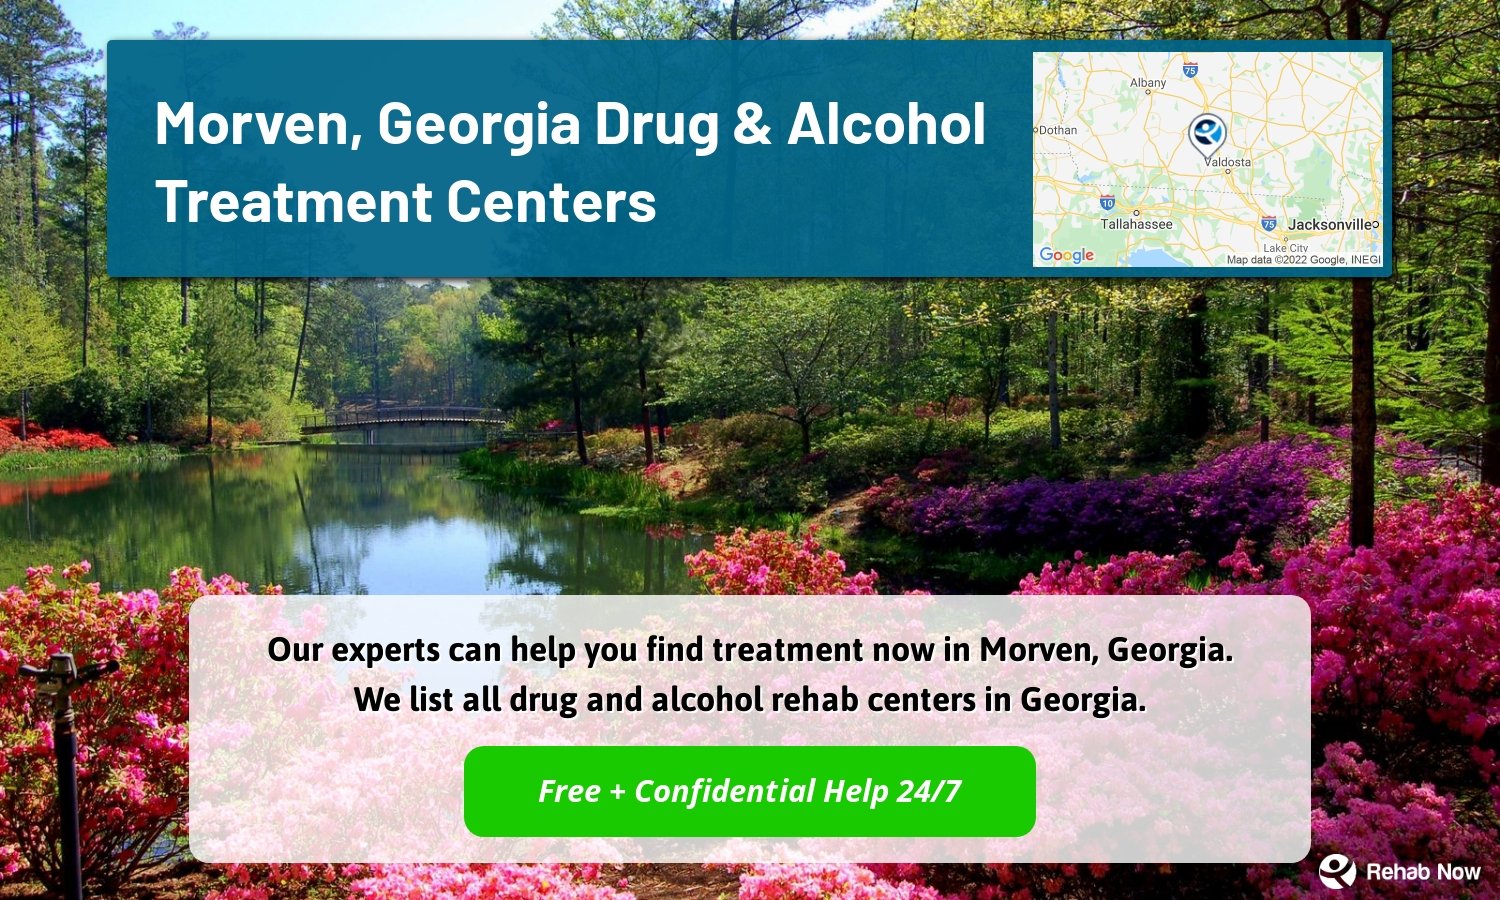 Our experts can help you find treatment now in Morven, Georgia. We list all drug and alcohol rehab centers in Georgia.